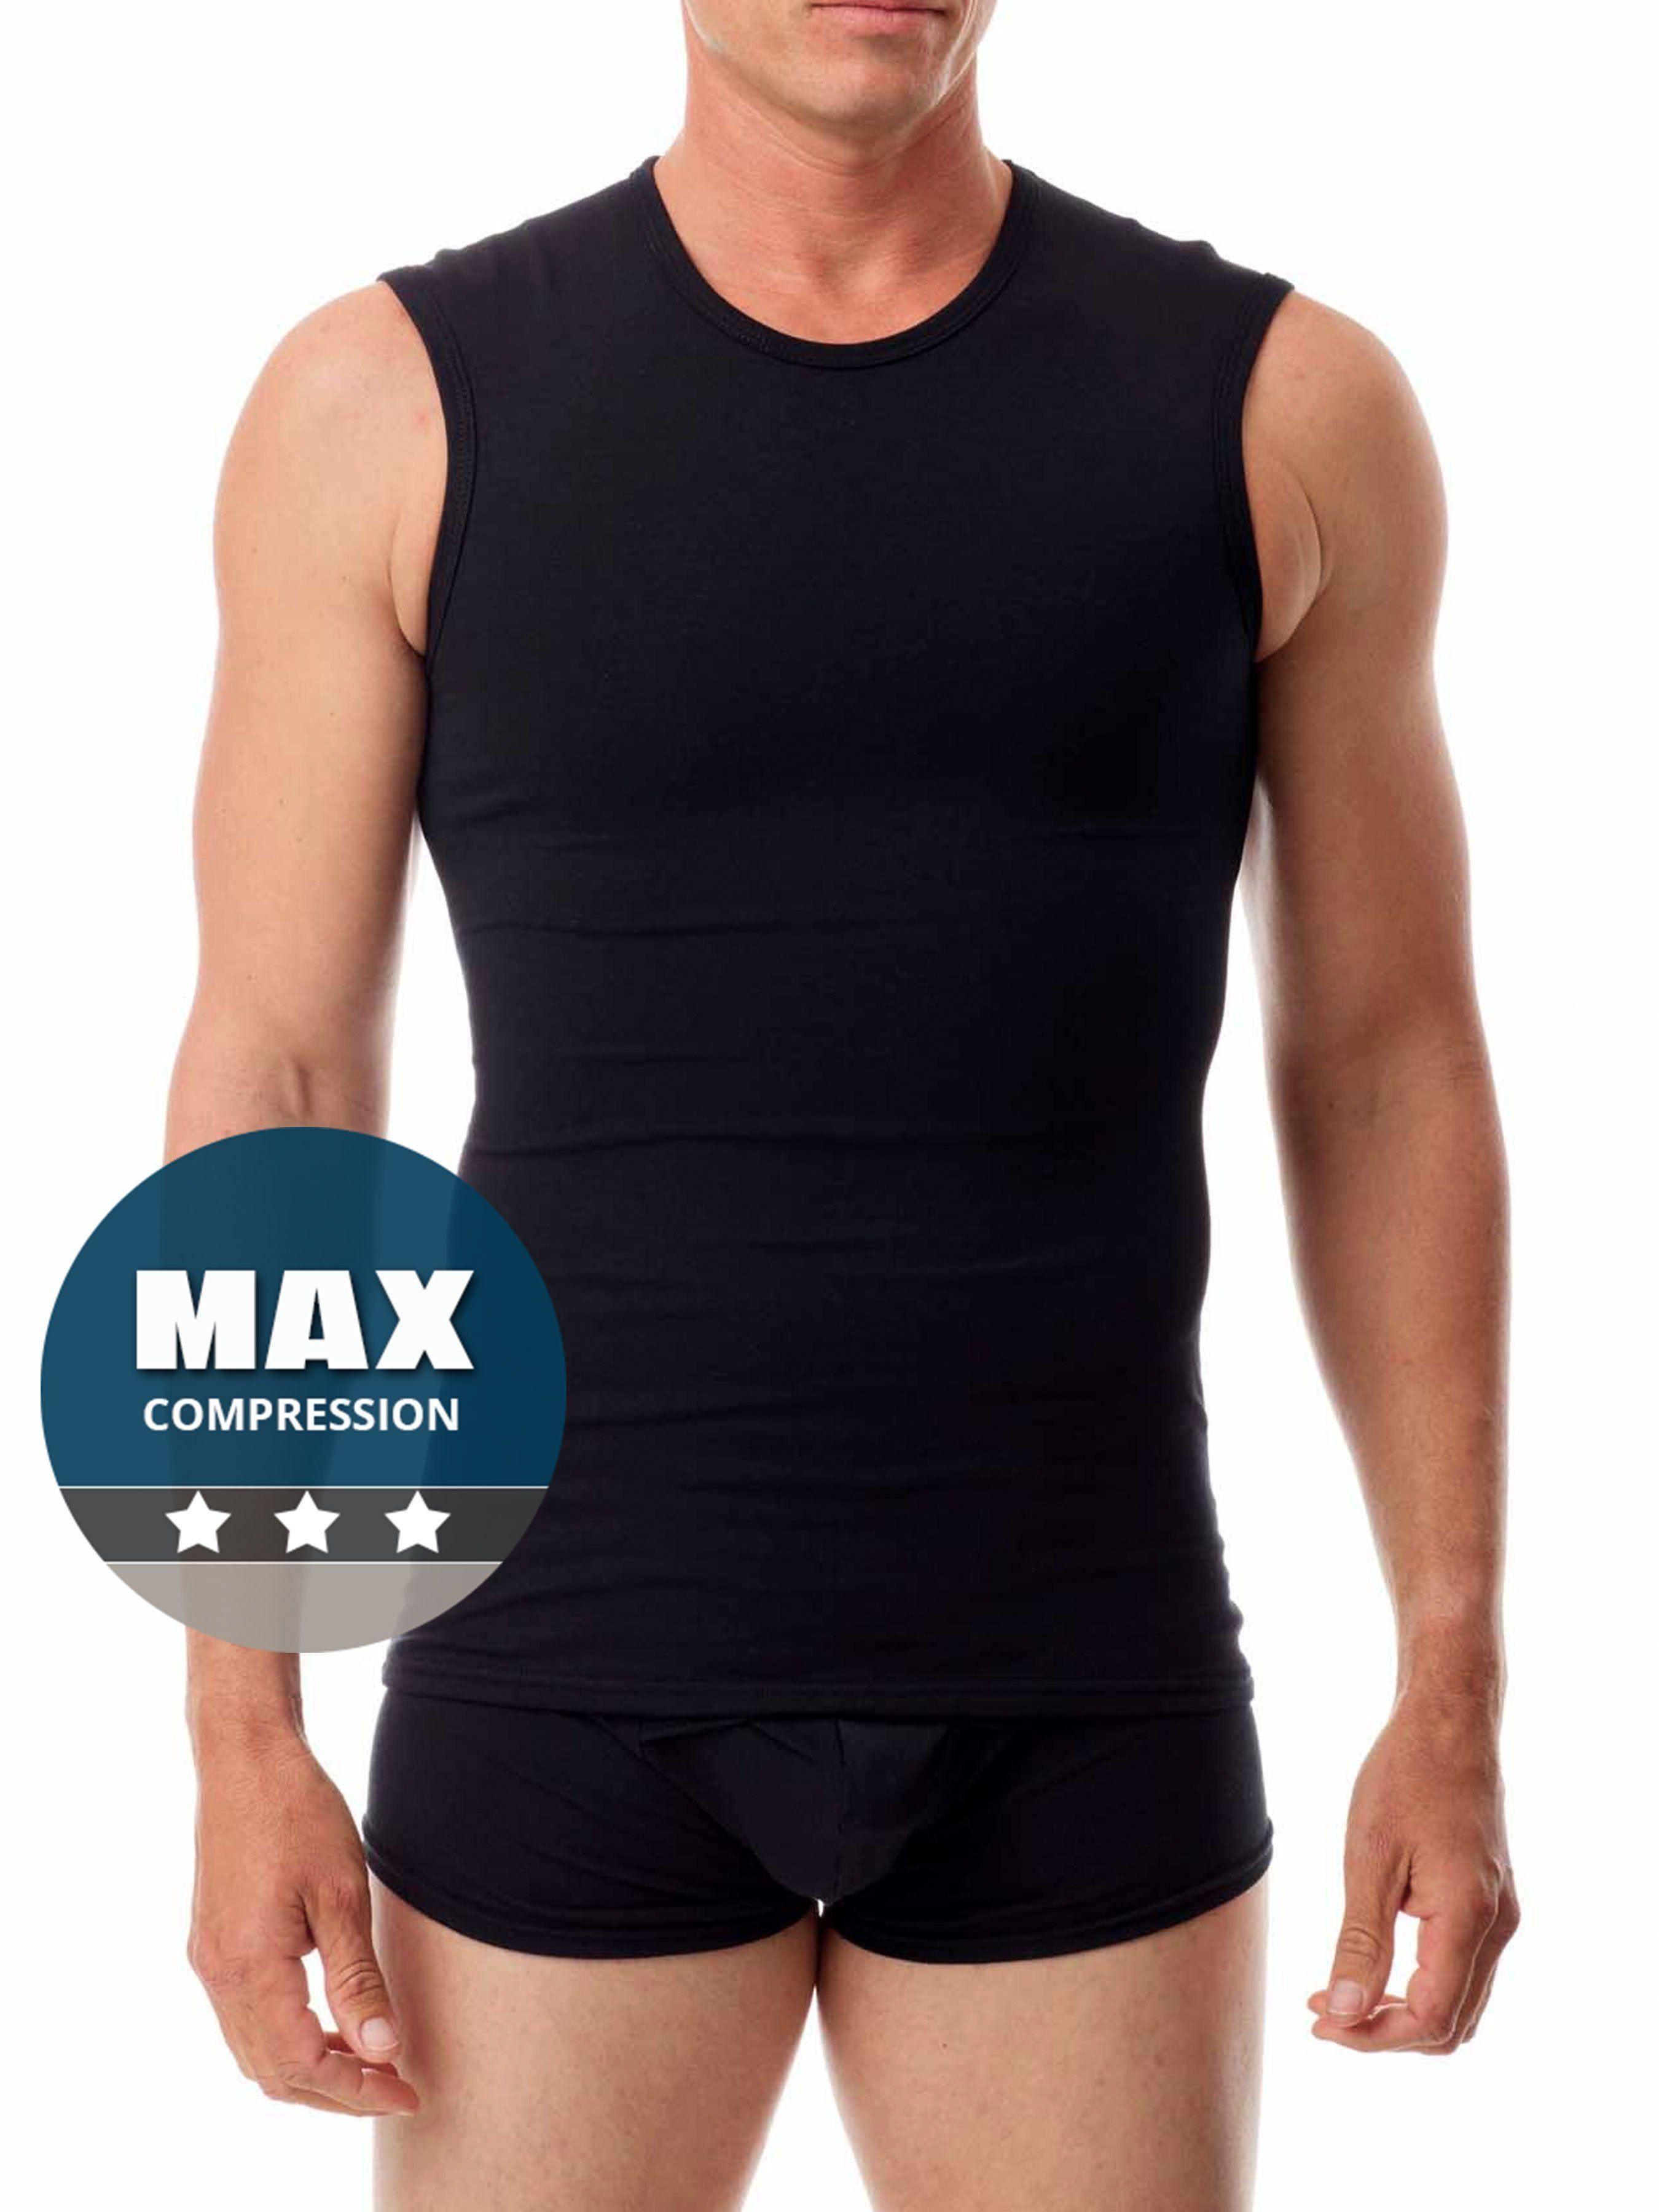 Compression Muscle Shirt | SALE.